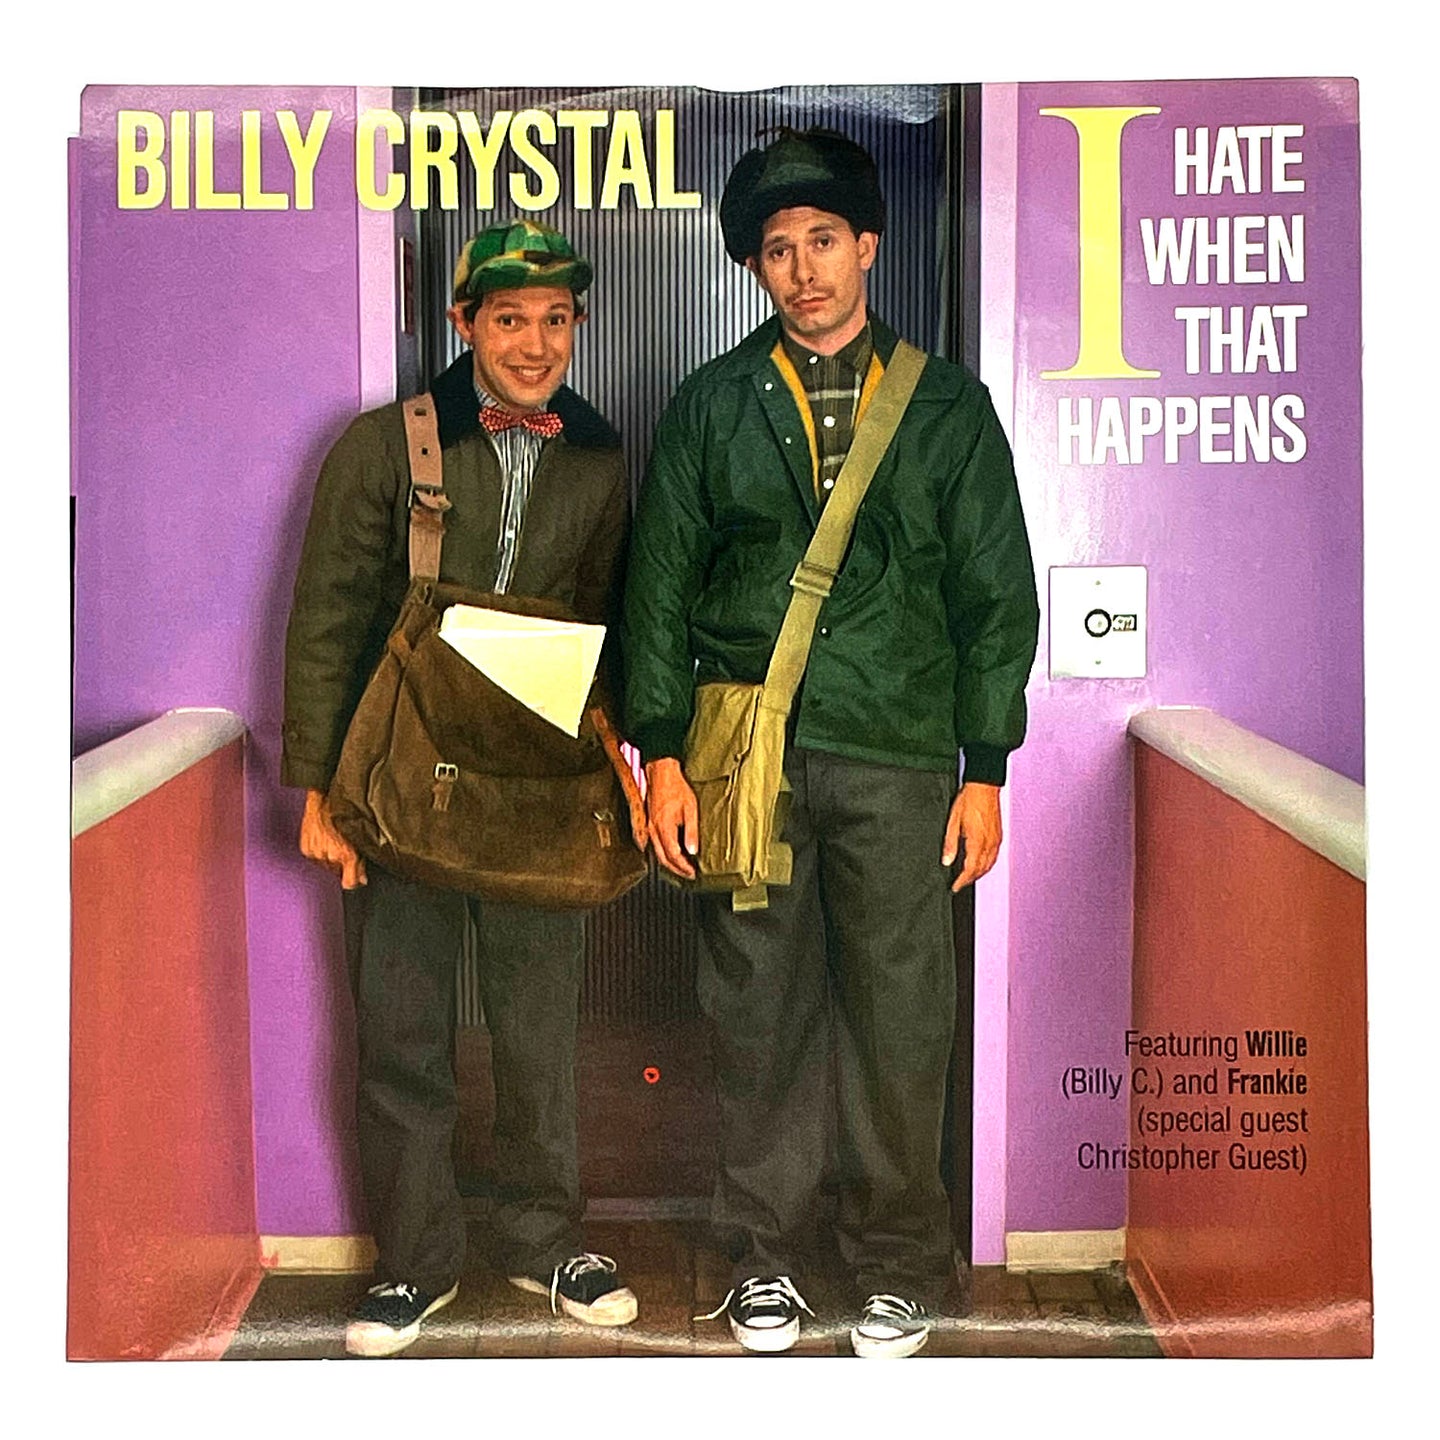 Billy Crystal : I HATE WHEN THAT HAPPENS/ I HATE WHEN THAT HAPPENS (DUB VERSION)